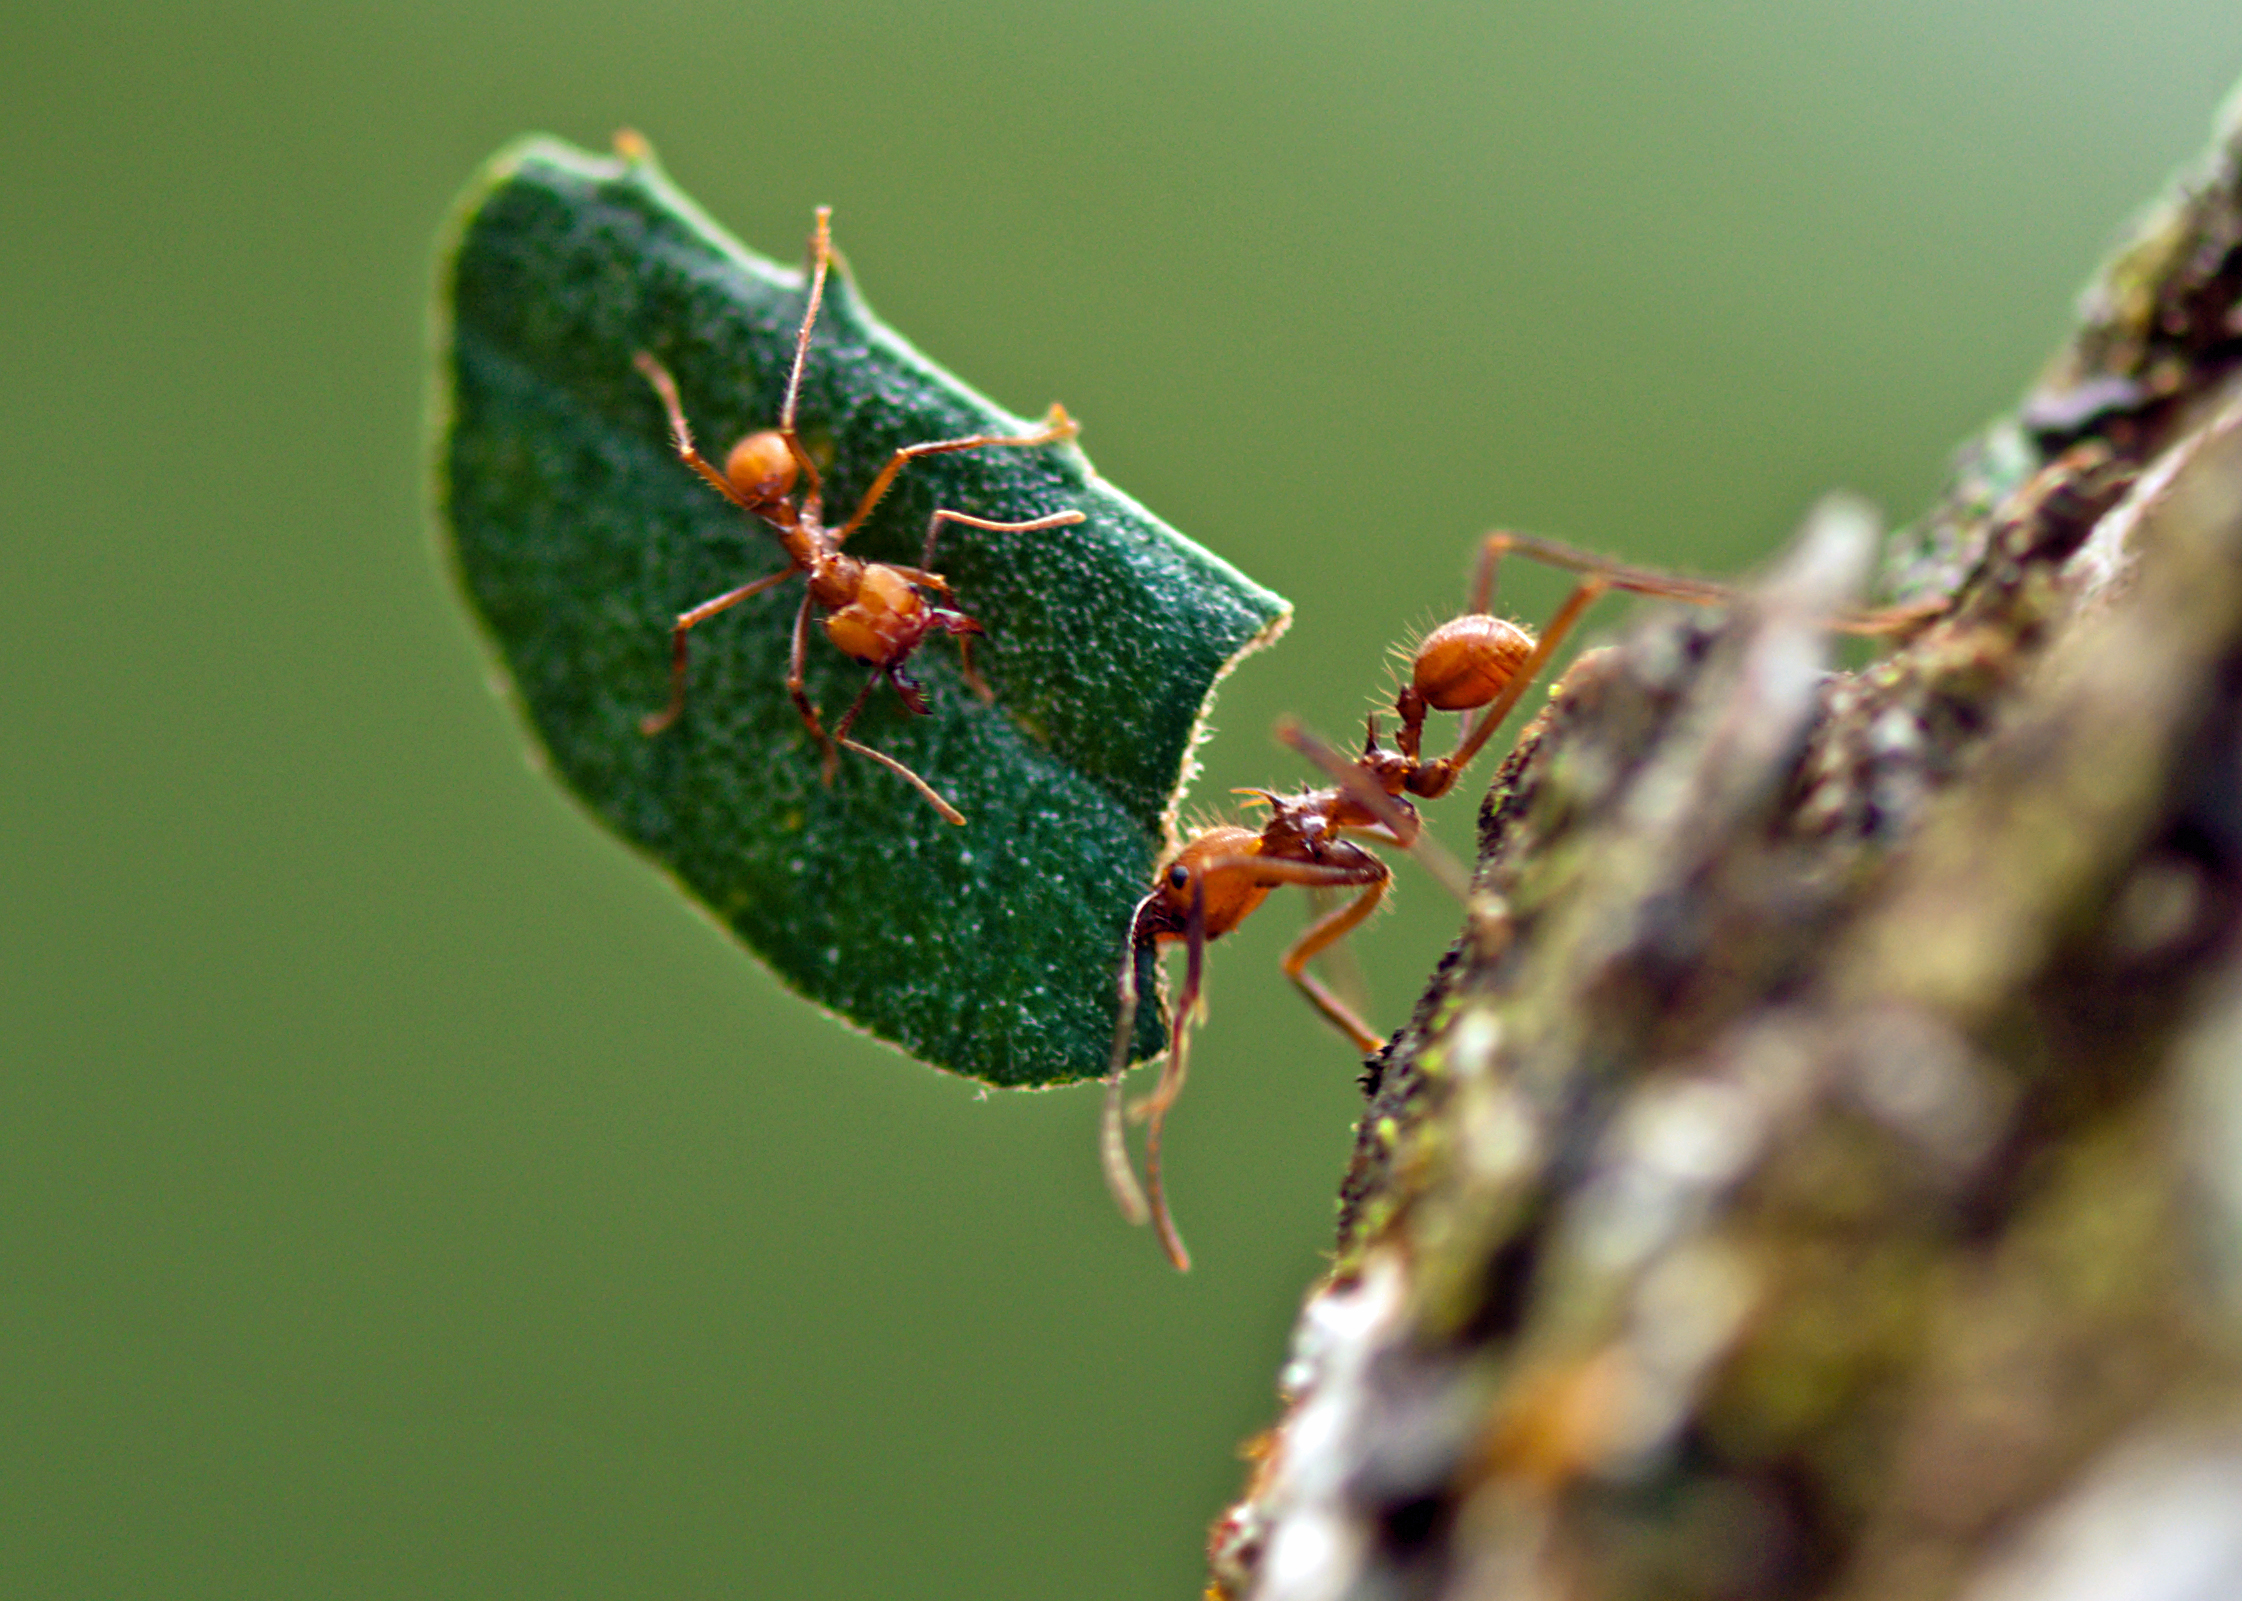 Ants with a leaf